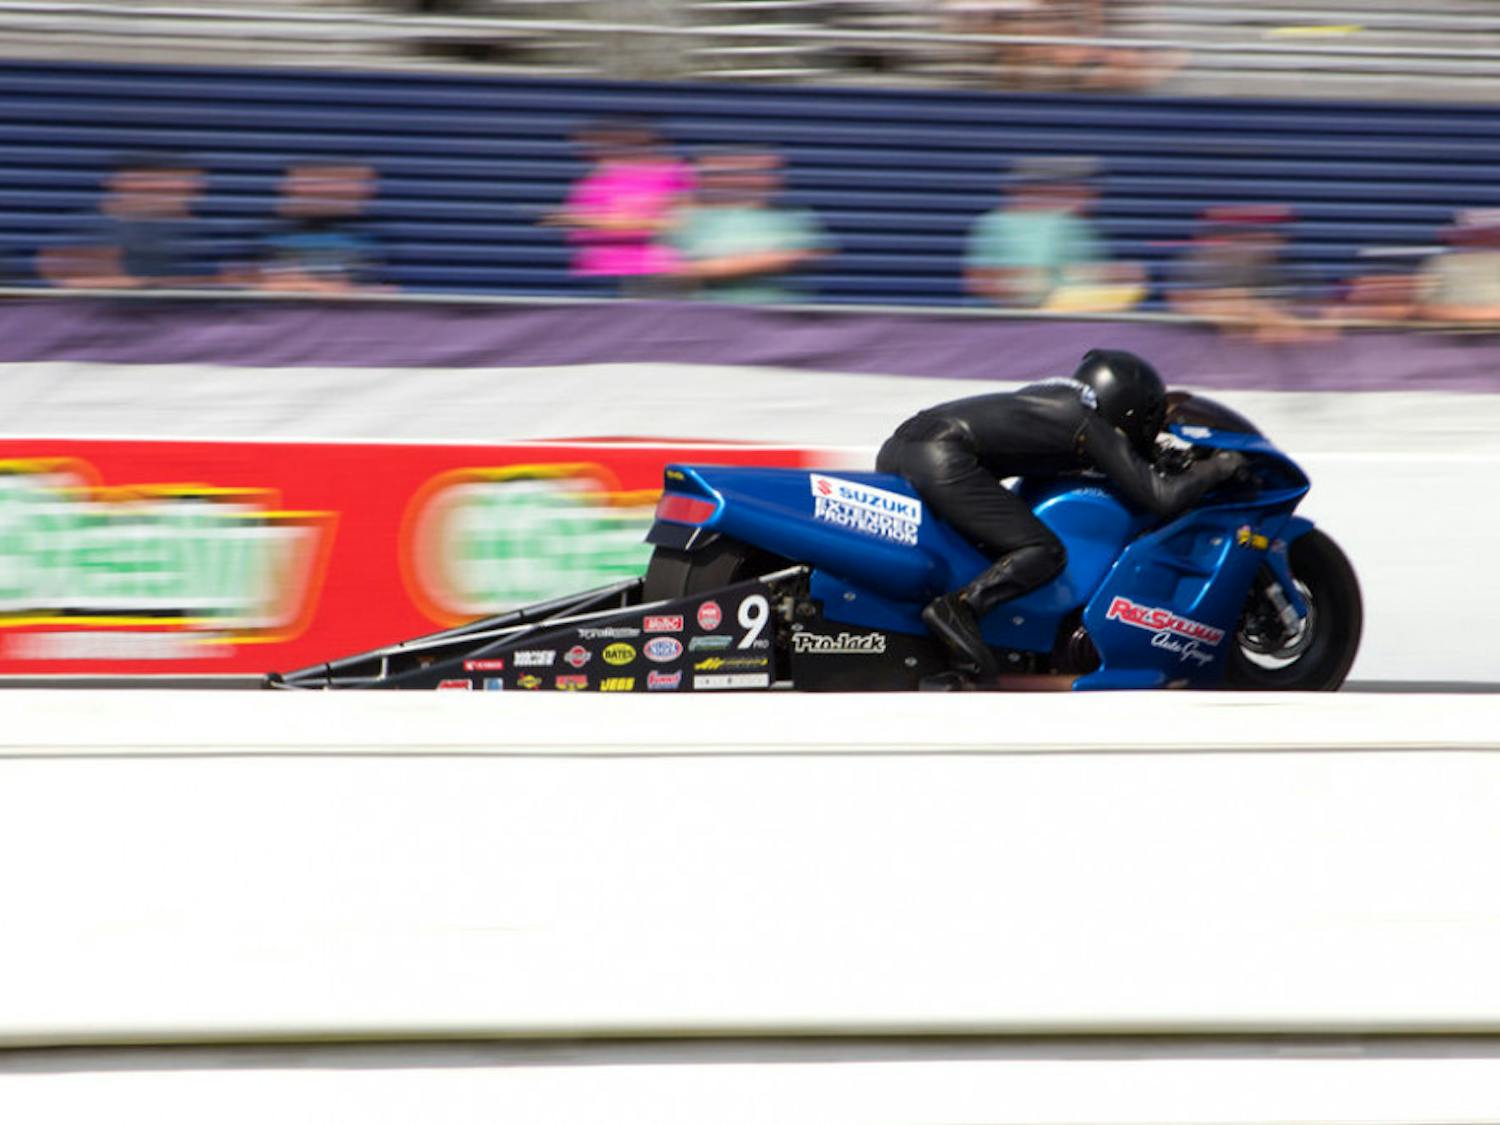 James Underdahl races down the track at Gatornationals on Saturday. The Pro Stock Motorcycle reached speeds up to 197 mph during the qualifying session.